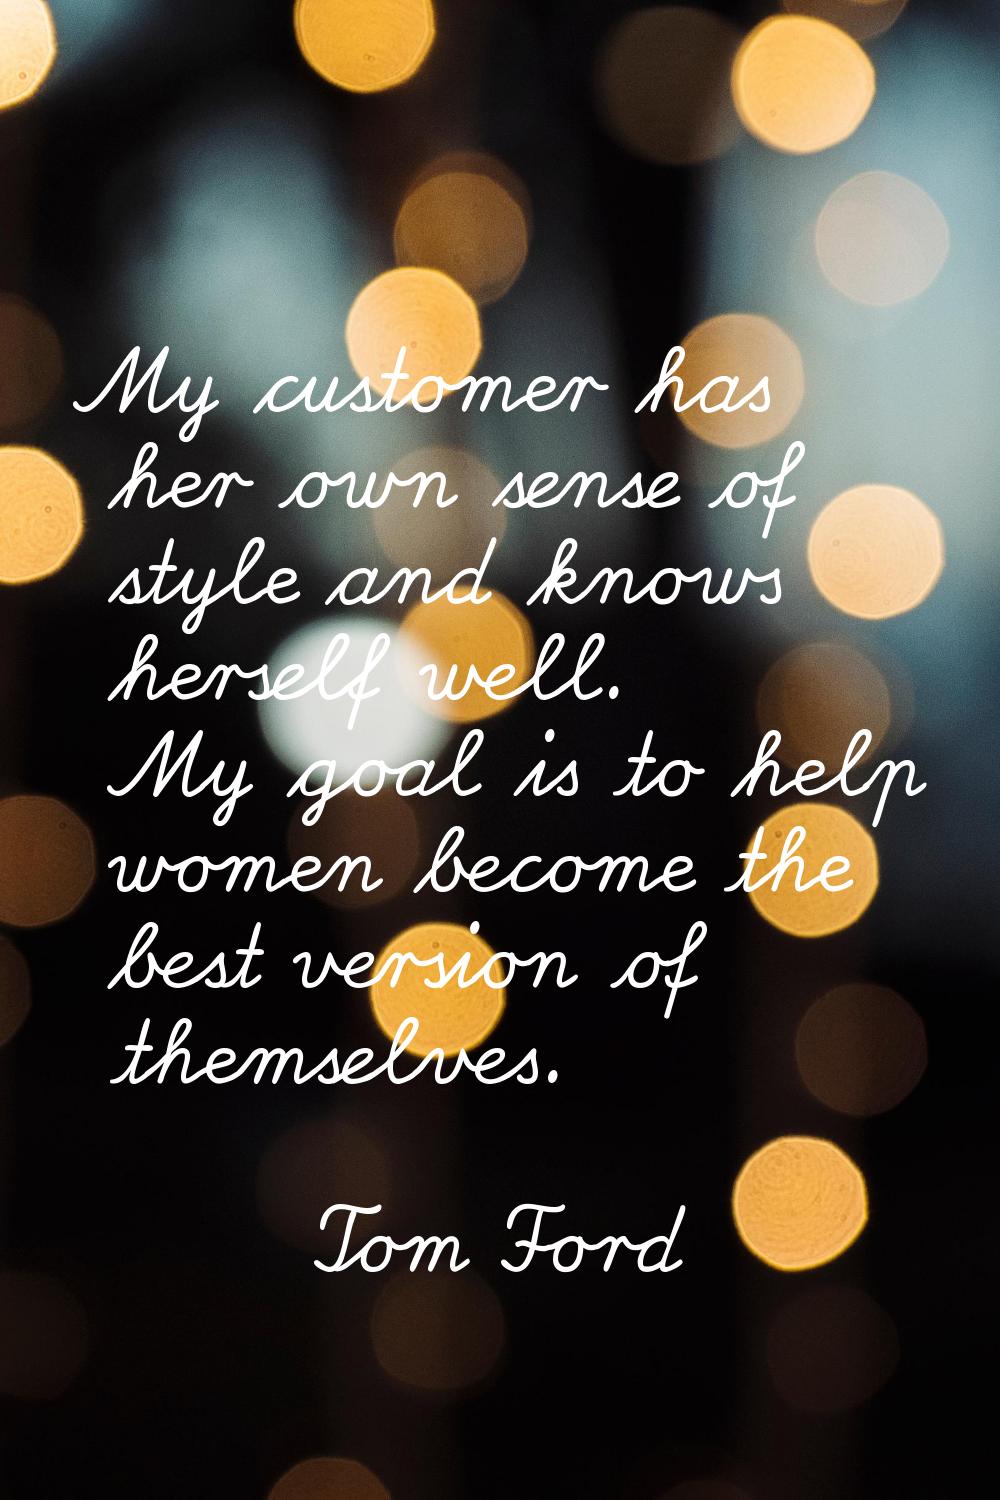 My customer has her own sense of style and knows herself well. My goal is to help women become the 